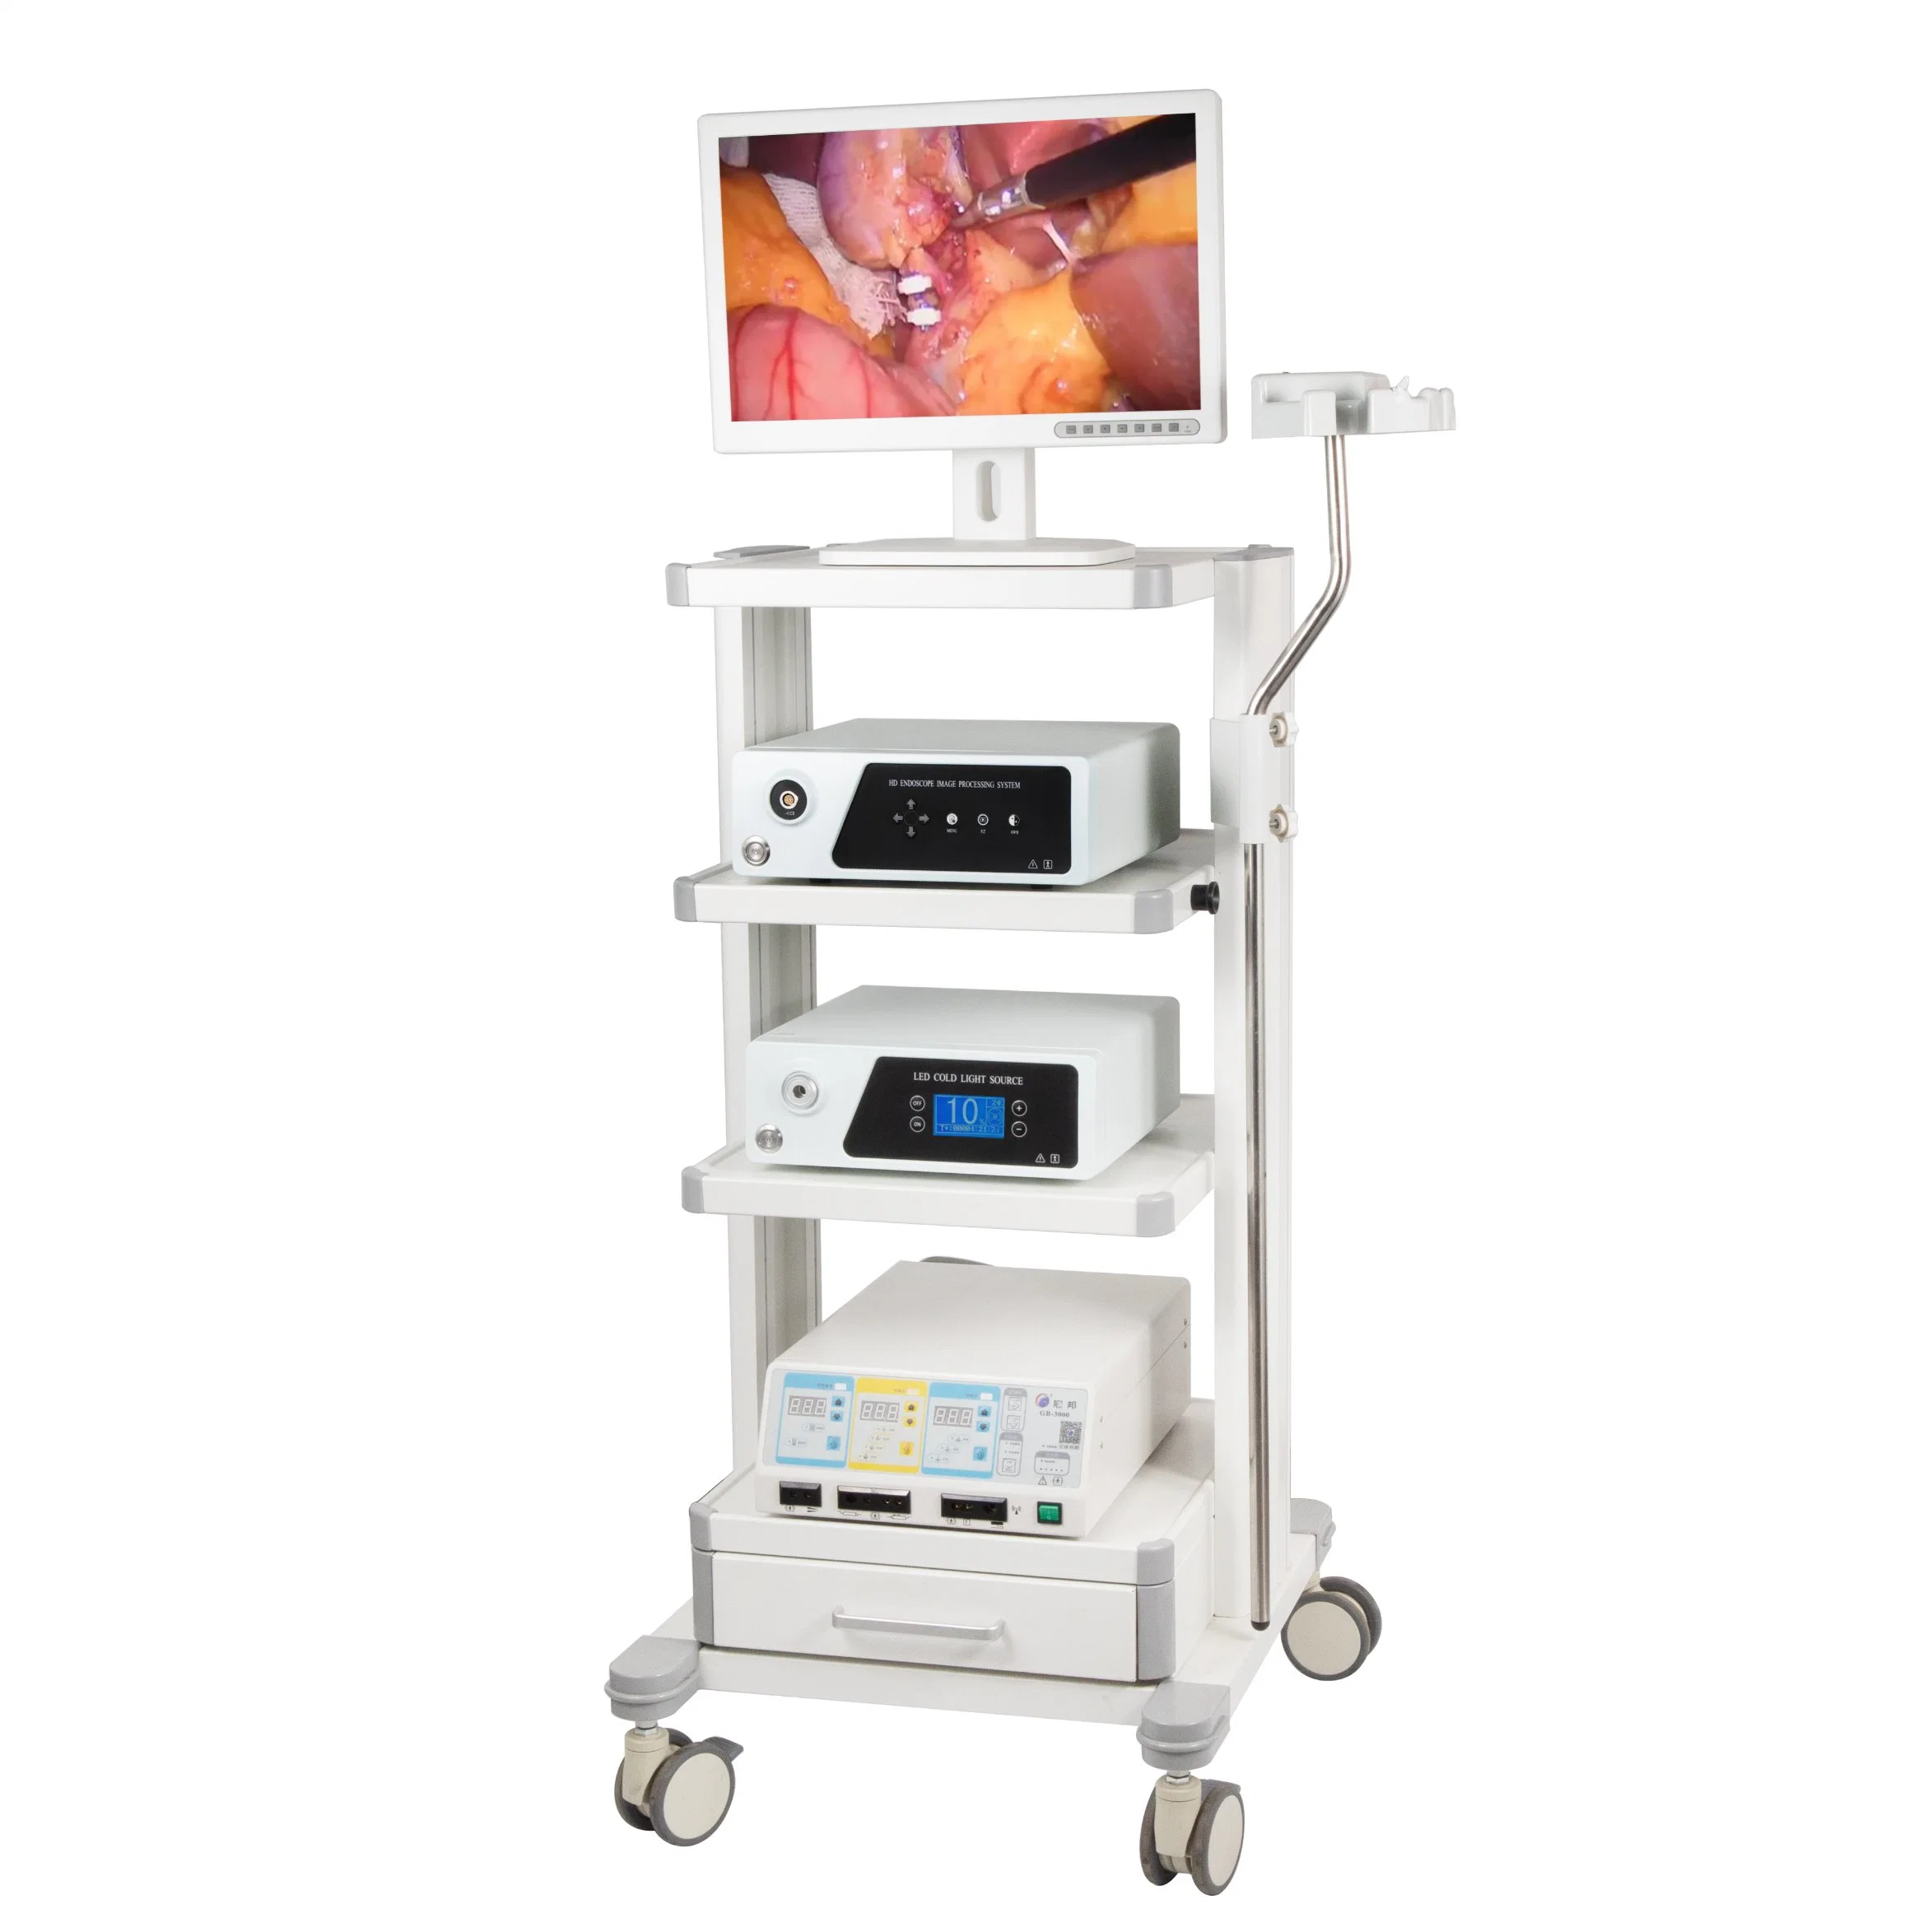 Medical HD Equipment for Diagnosis